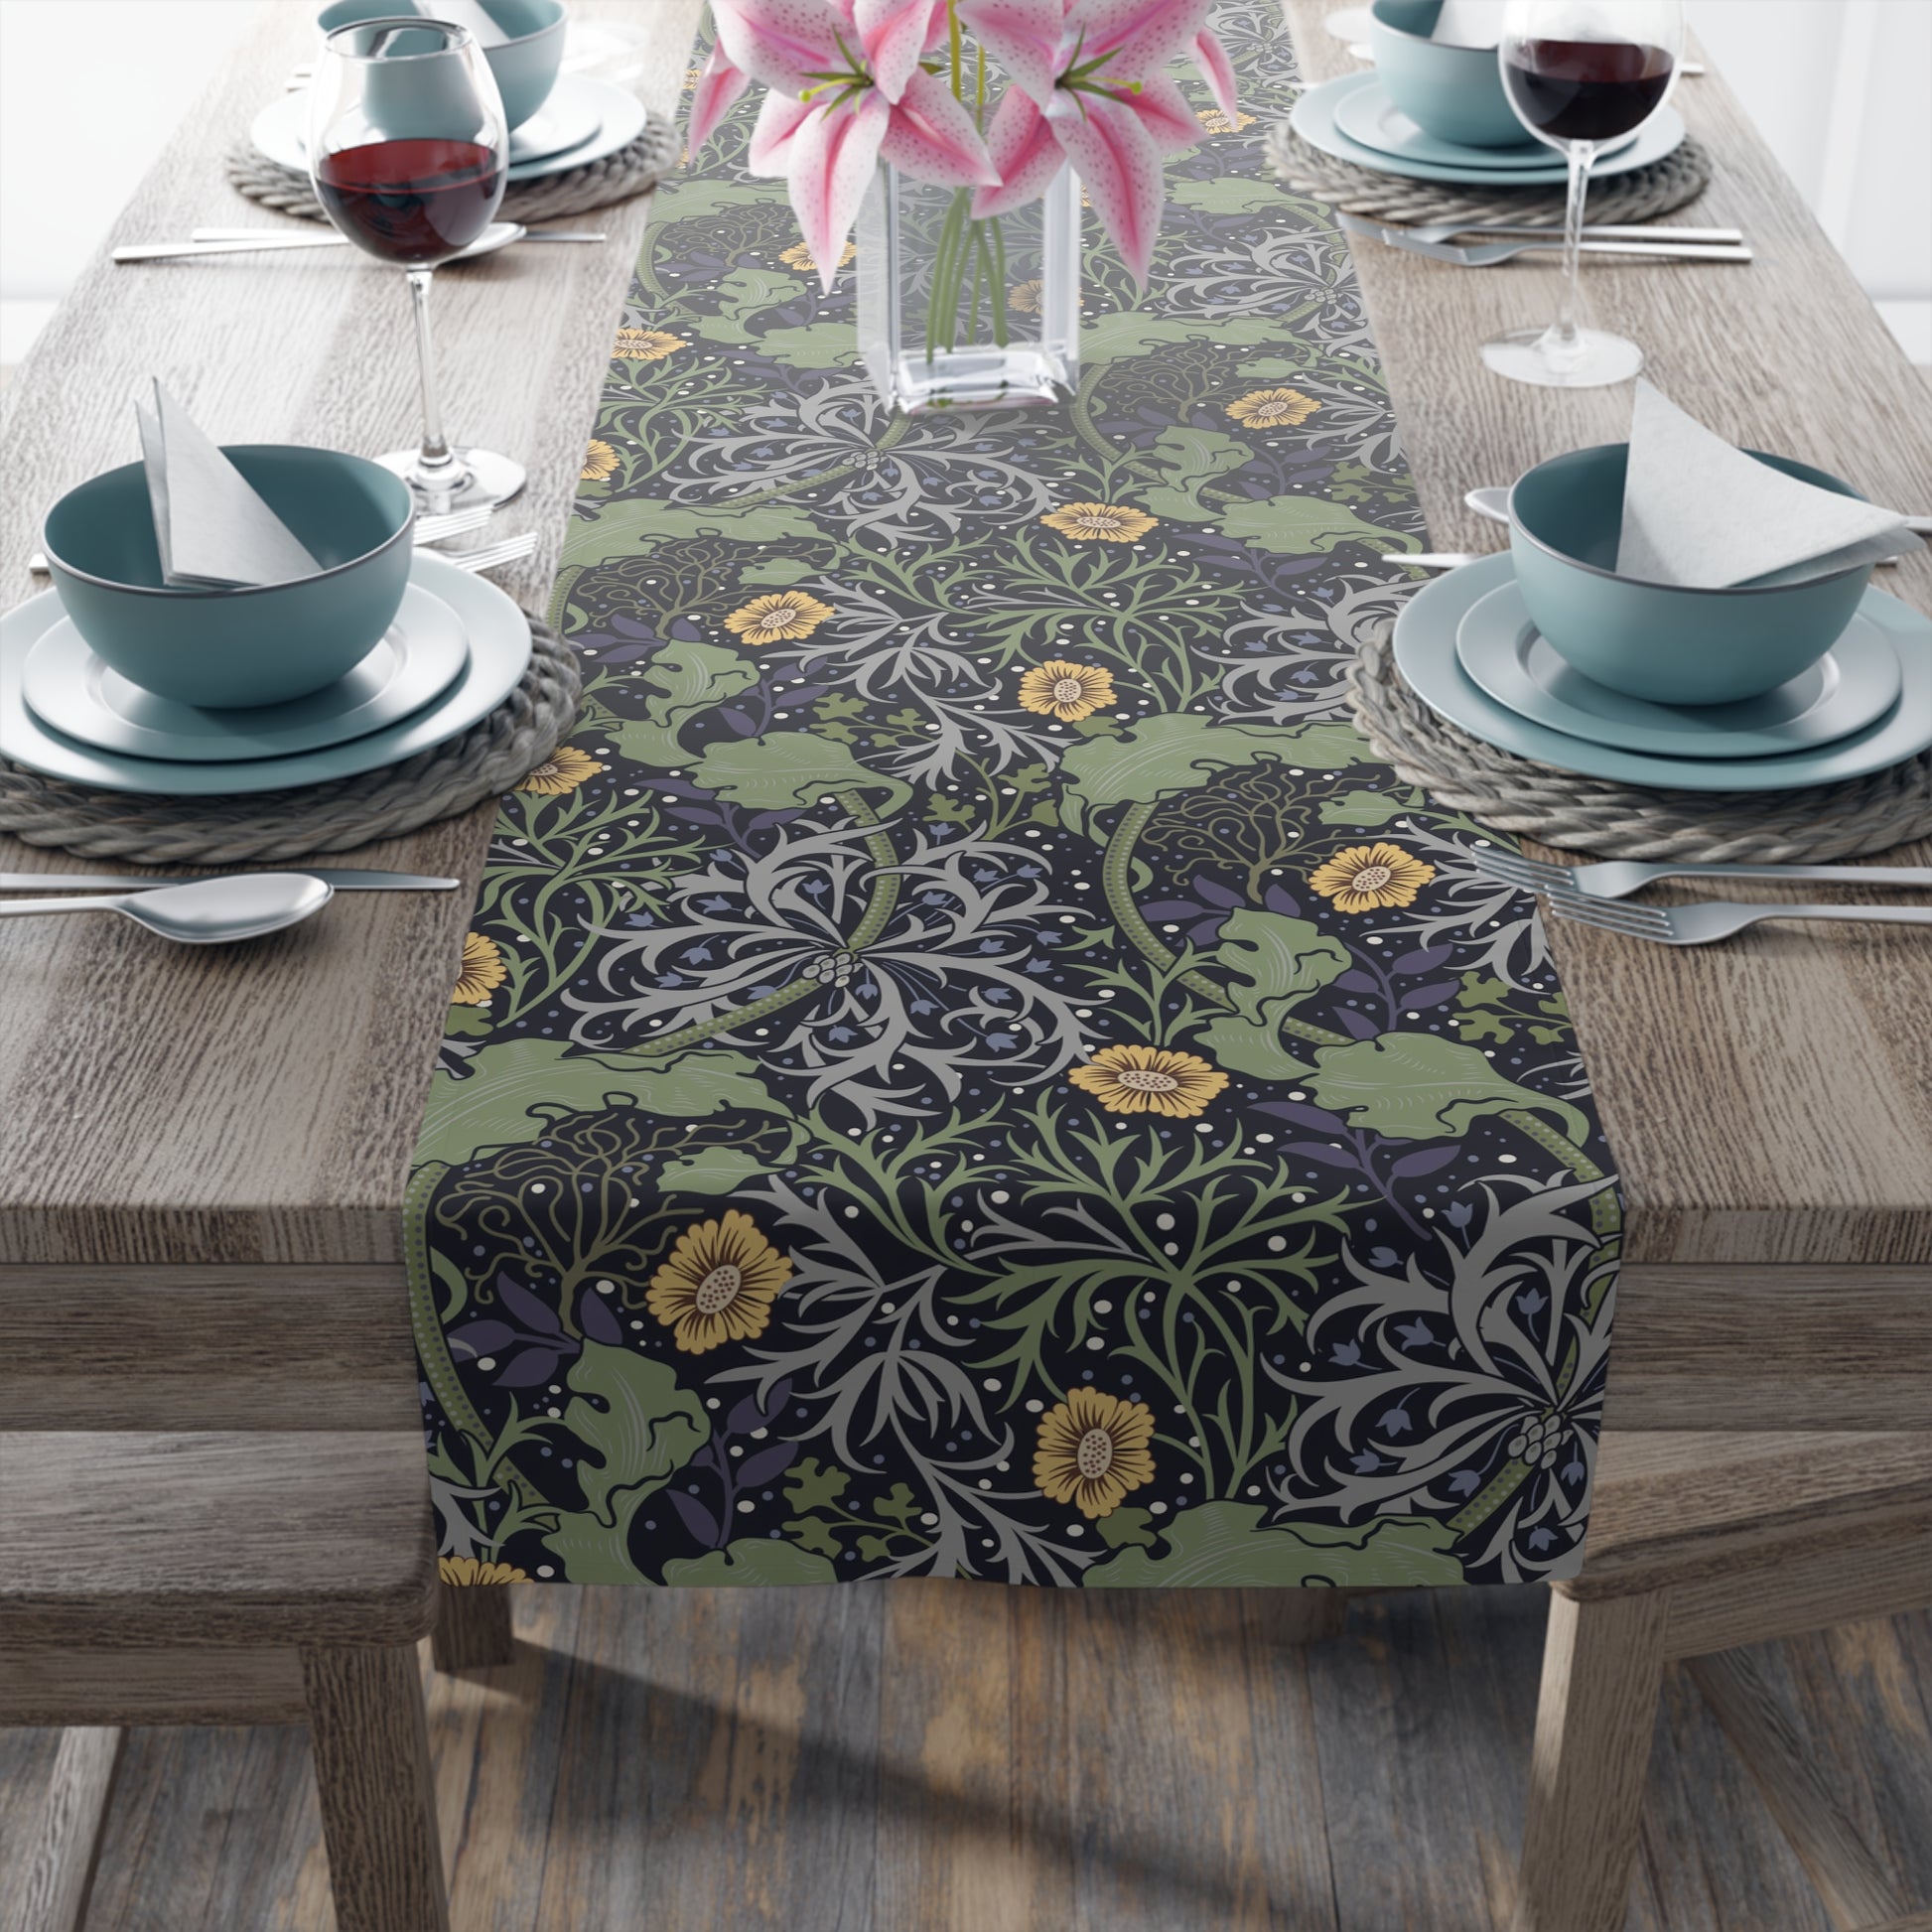 william-morris-co-table-runner-seaweed-collection-yellow-flower-5